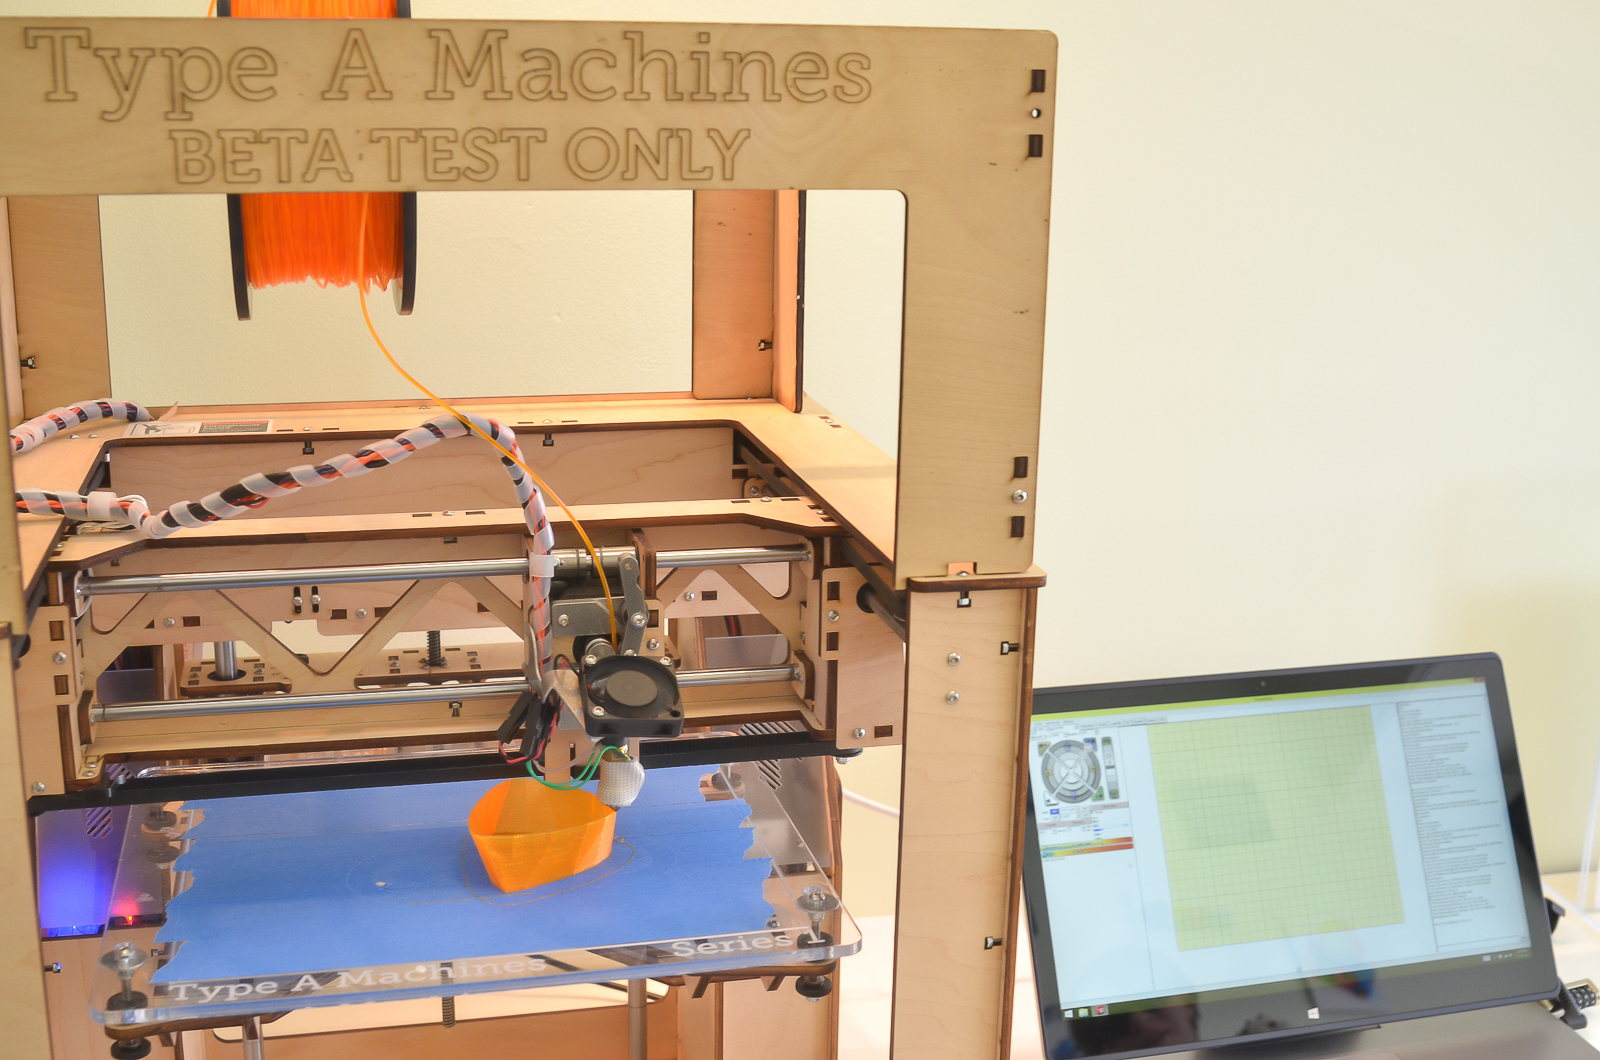 3D printing shop, HoneyBee3D, offers rapid prototyping and classes ... - PRK 4091